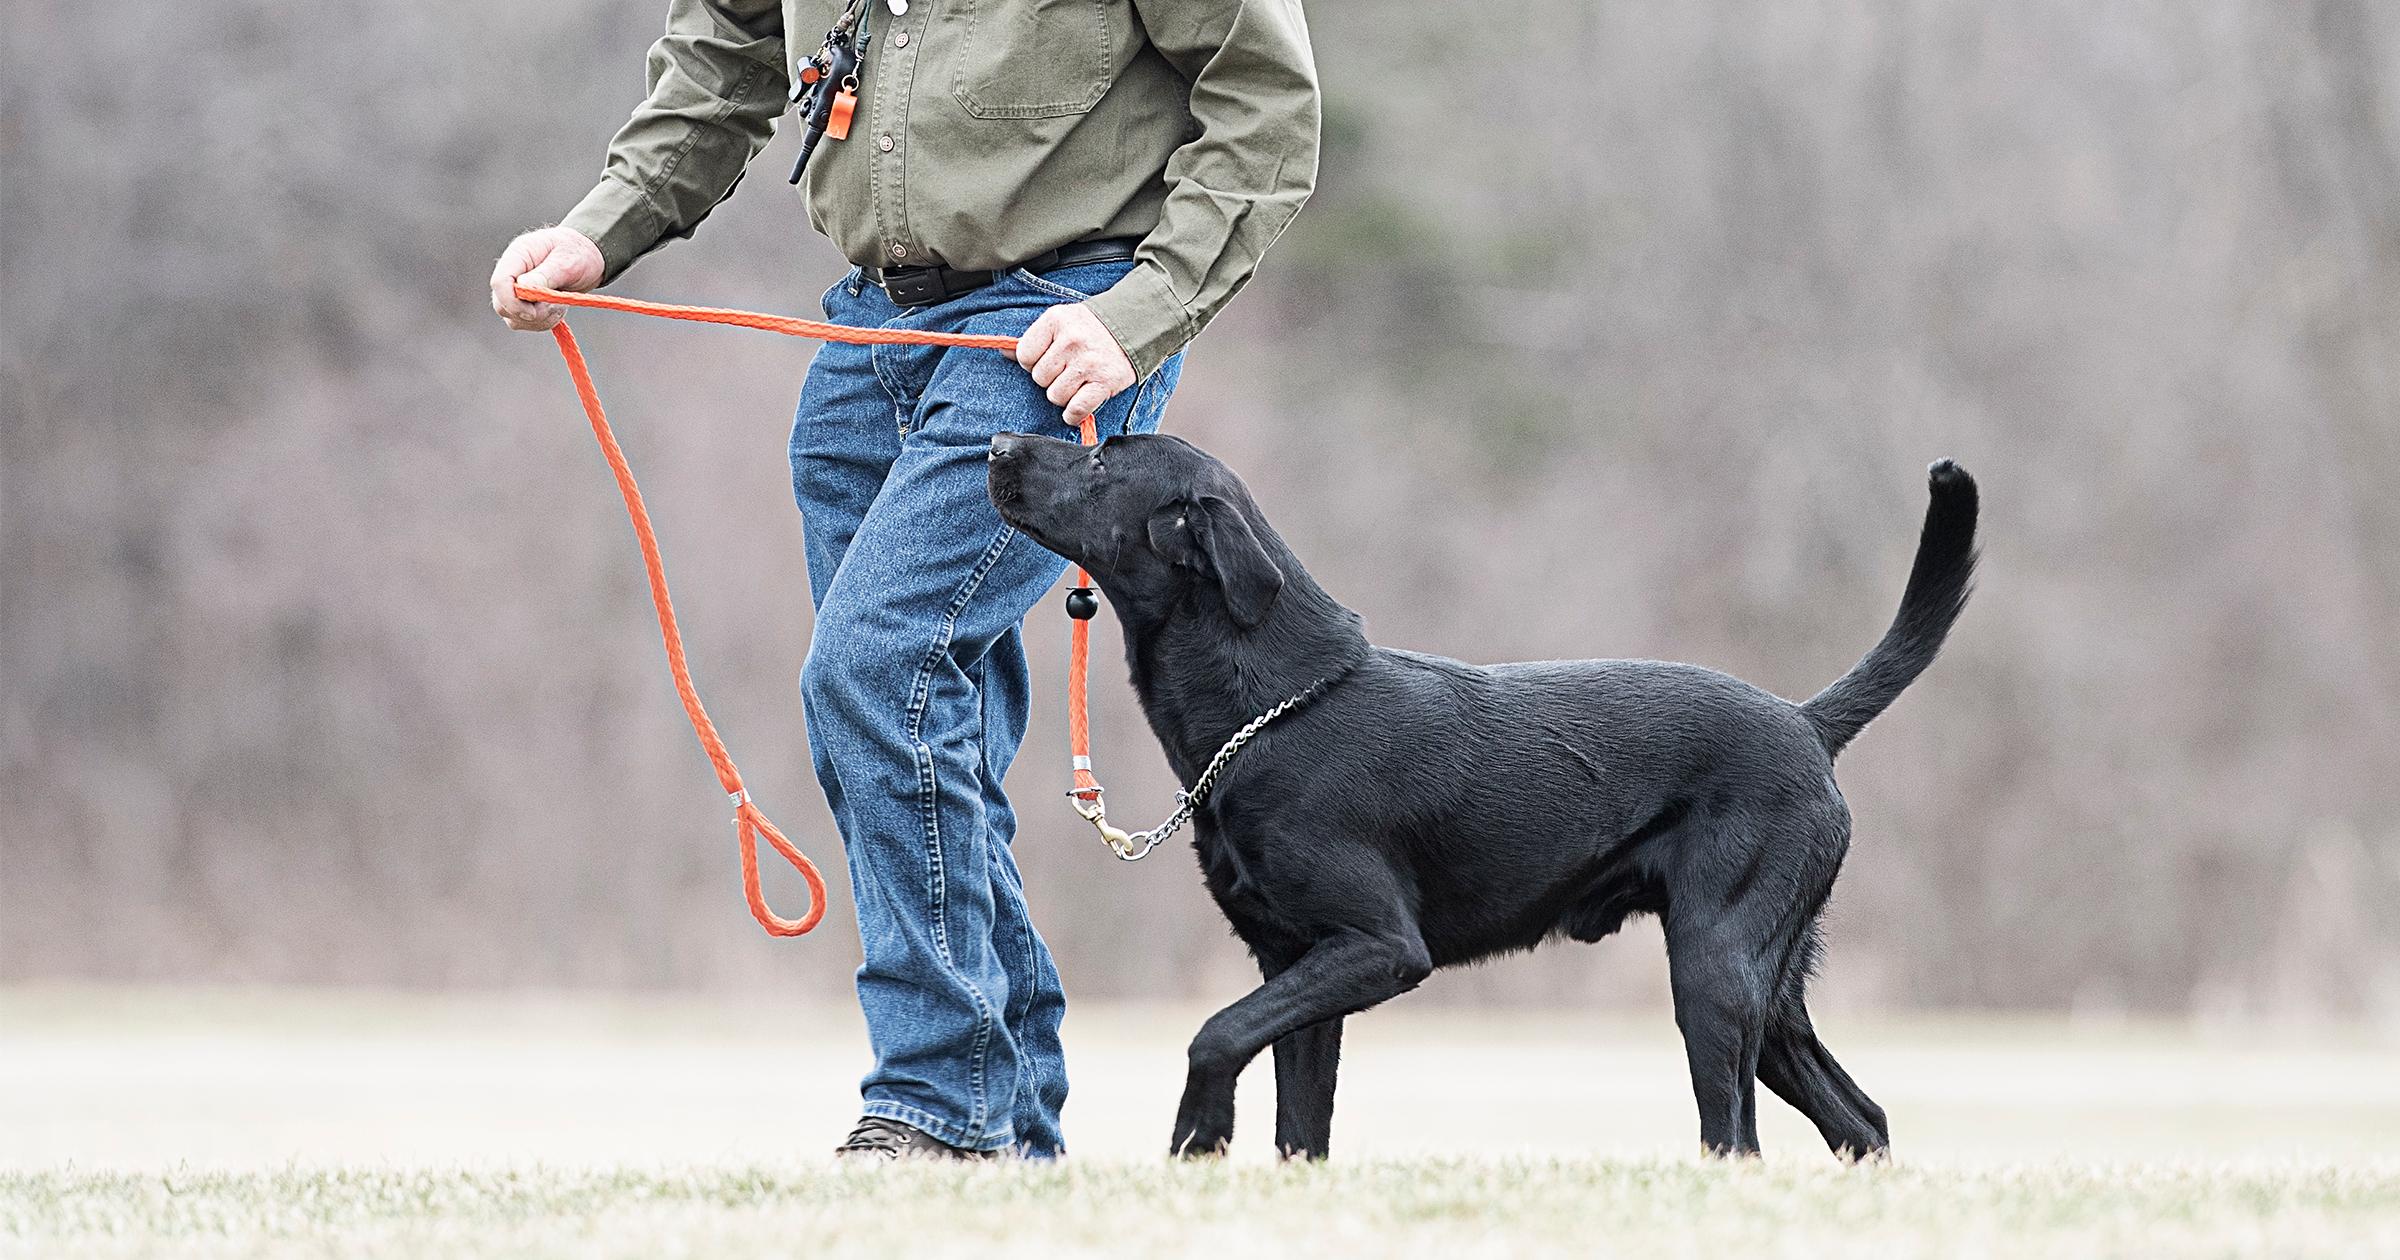 Teach Your DOG to HEEL BETWEEN Your Legs - Dog Training Made Easy